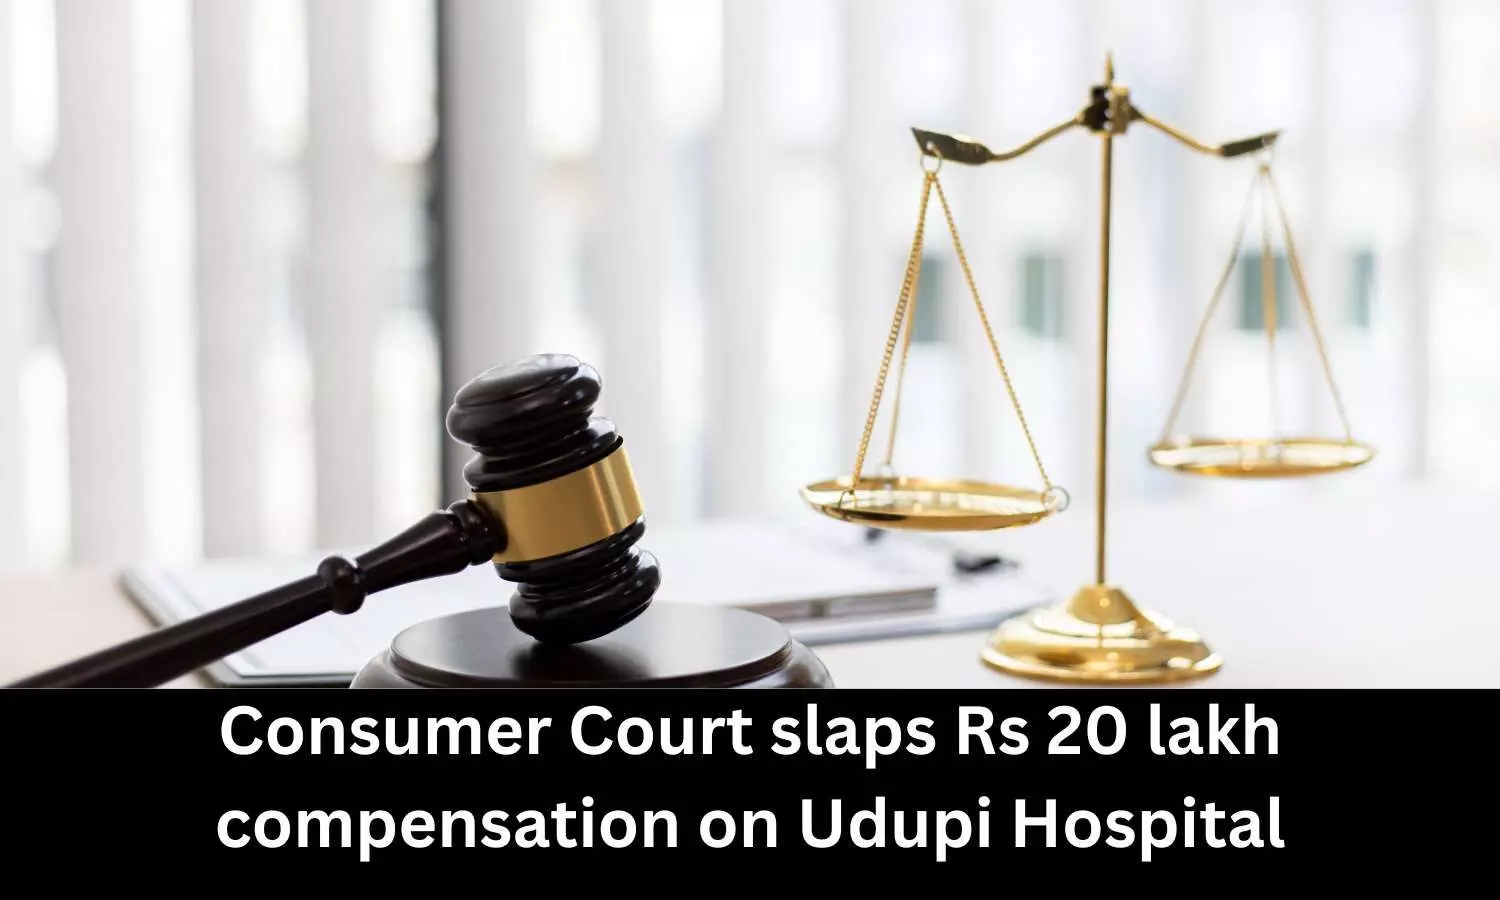 Udupi Hospital, doctors slapped with Rs 20 lakh compensation for leaving surgical mop inside patient during C-Section